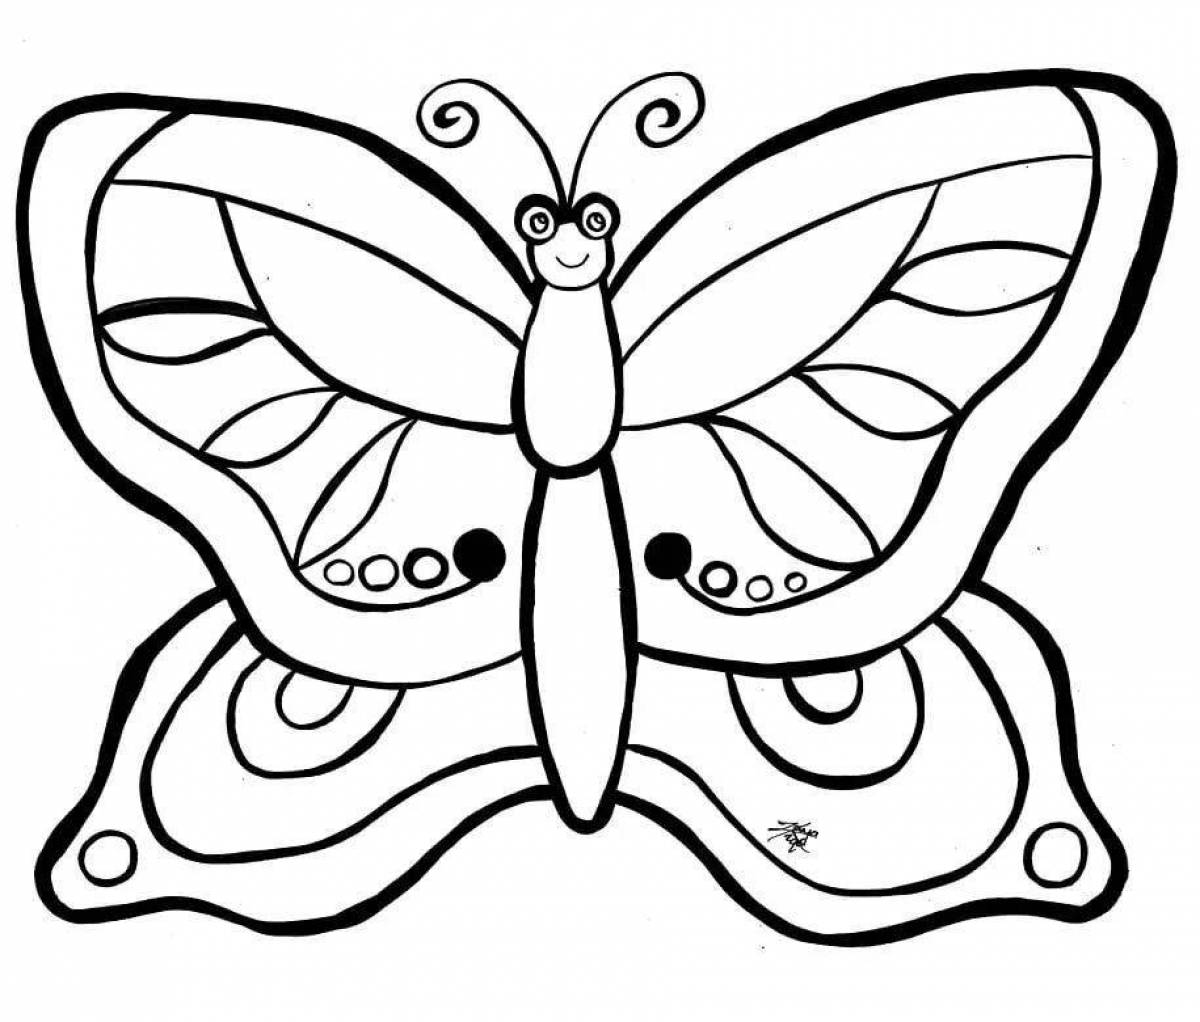 Great butterfly coloring book for 4-5 year olds